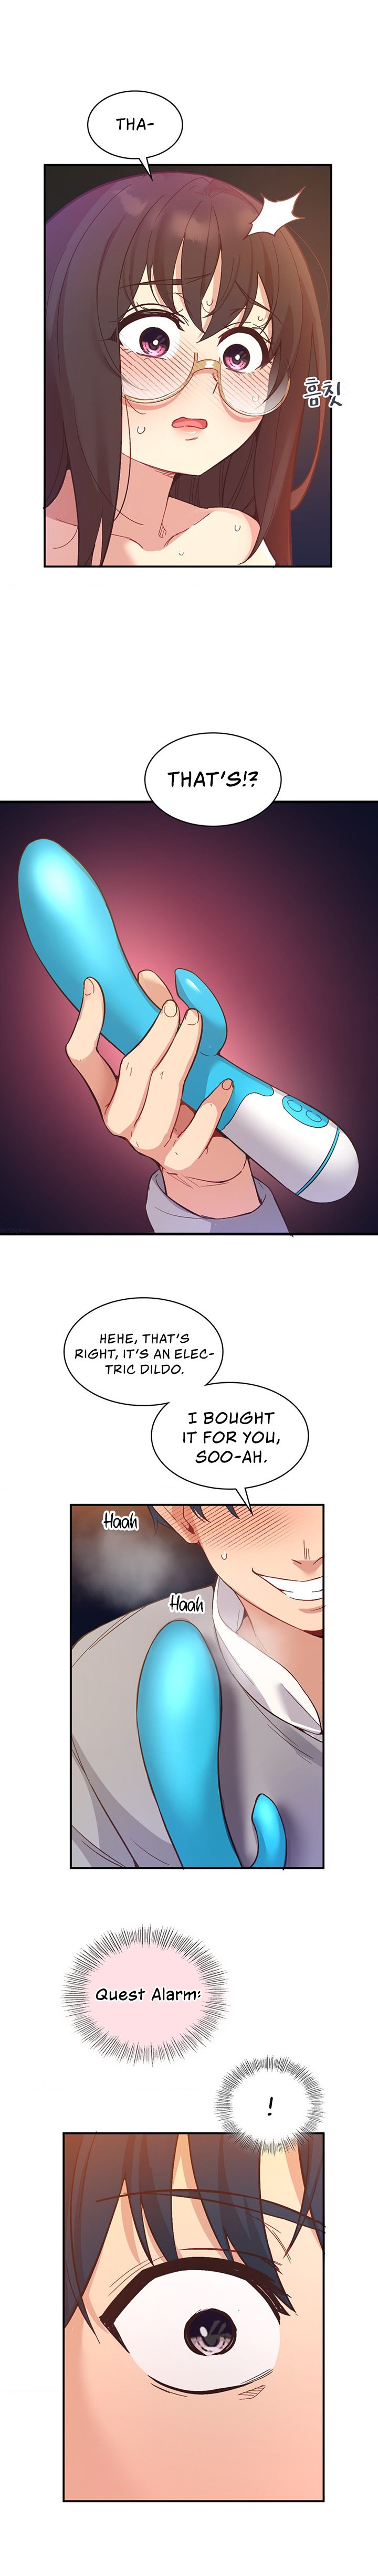 Smart App Life - Chapter 16 Page 4